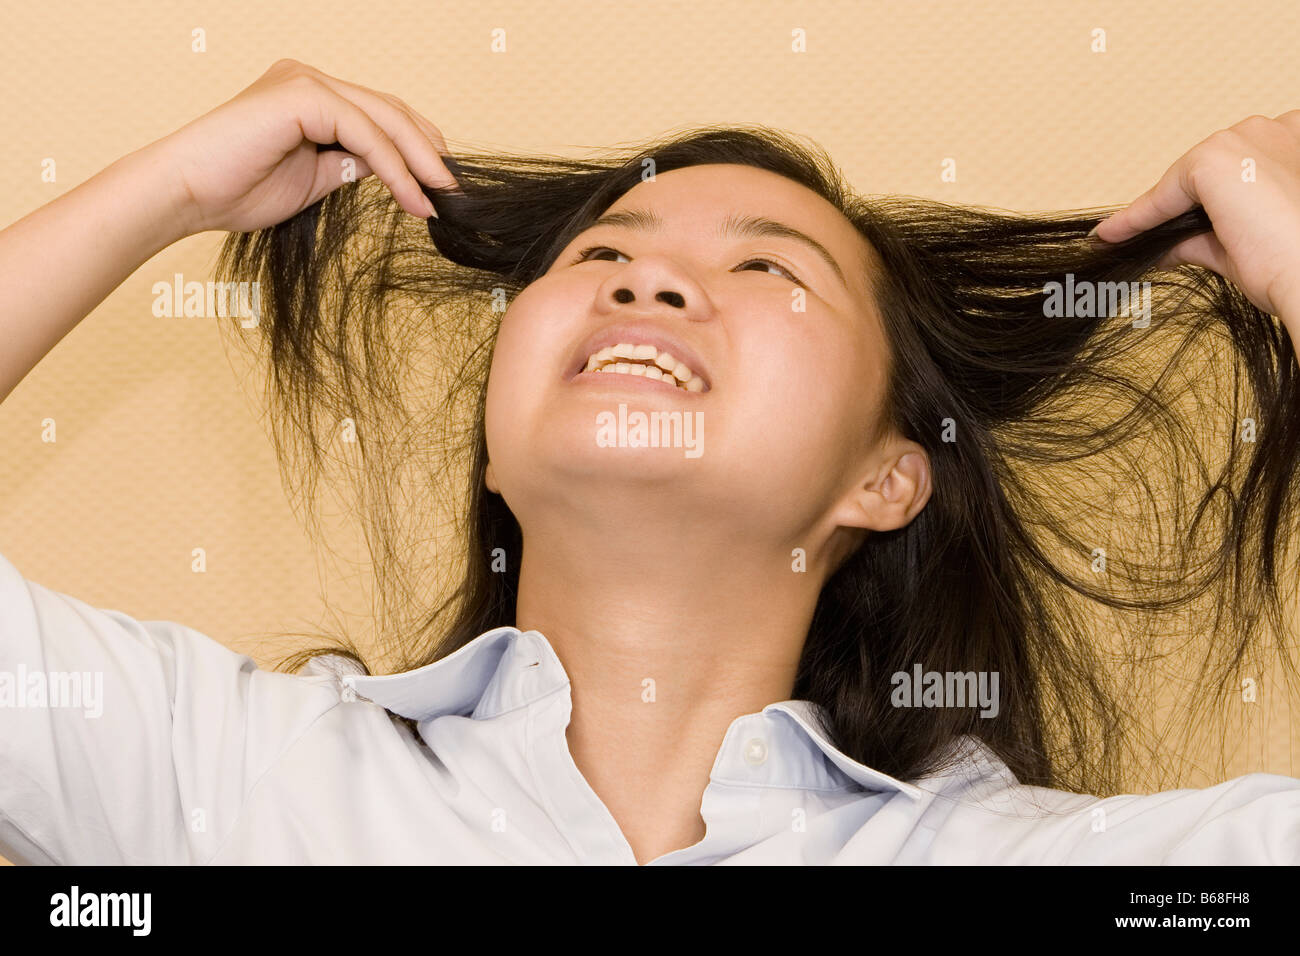 Close-up of a young woman holding her hair and smiling Stock Photo